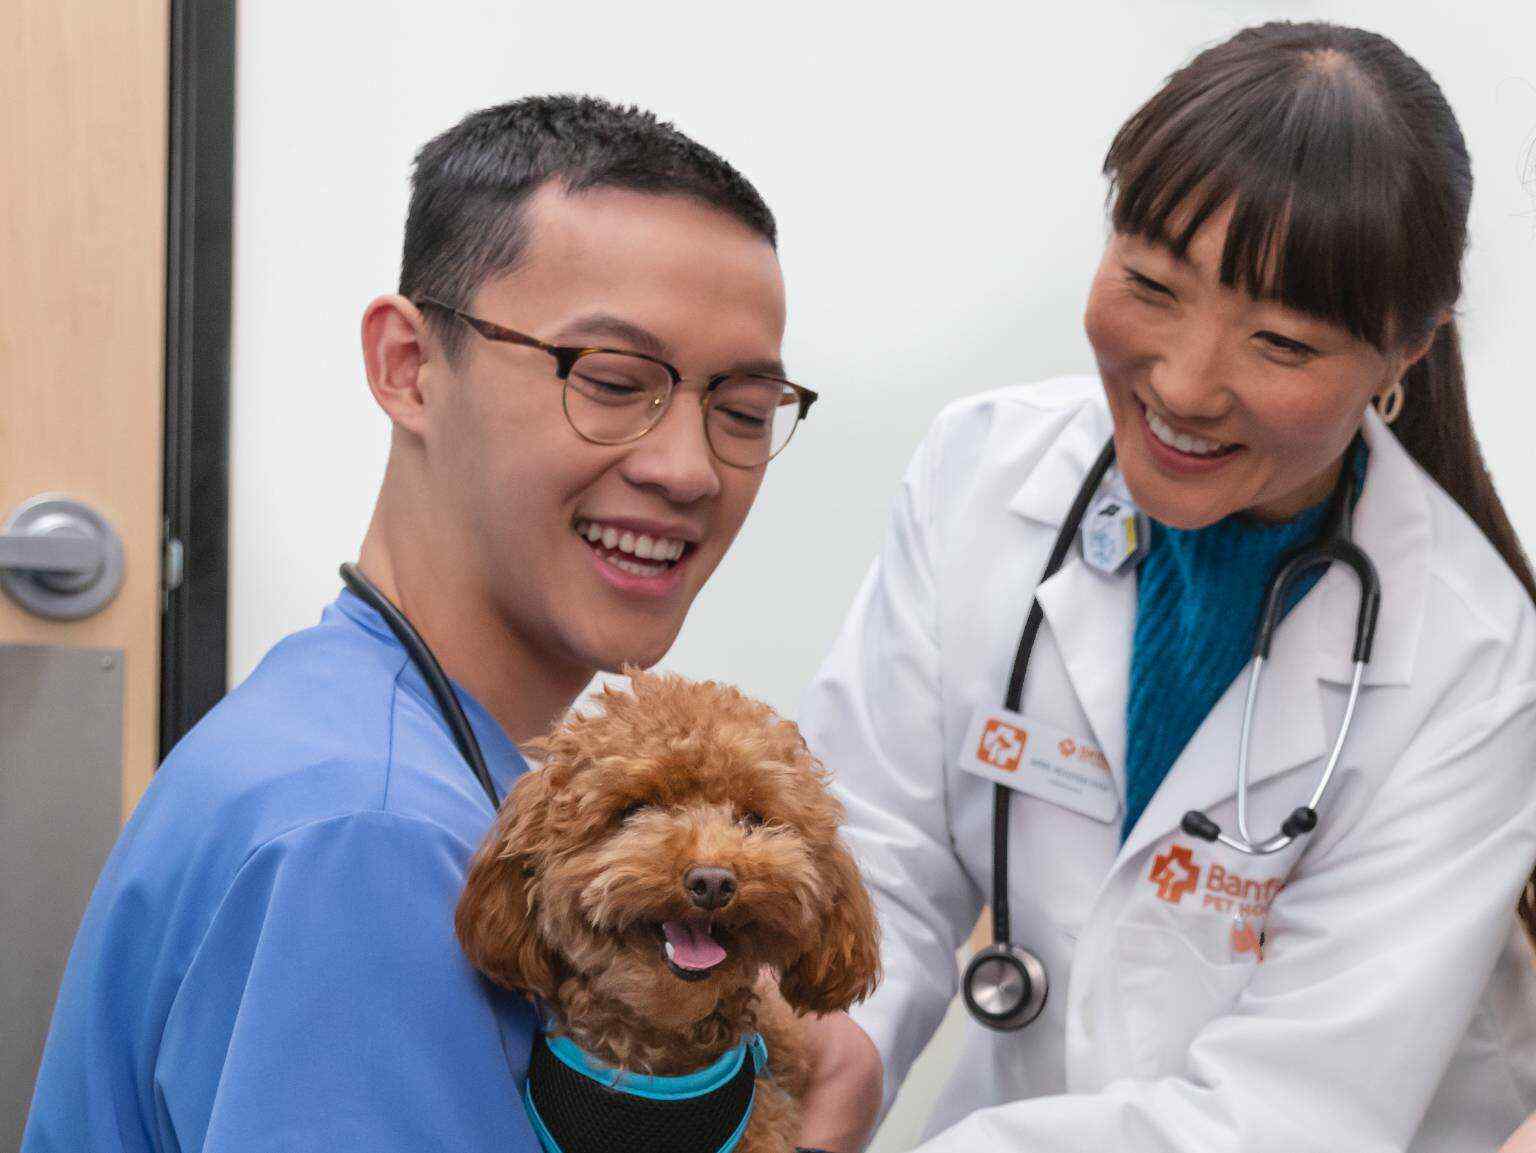 two-smiling-veterinarians-hold-puppy.